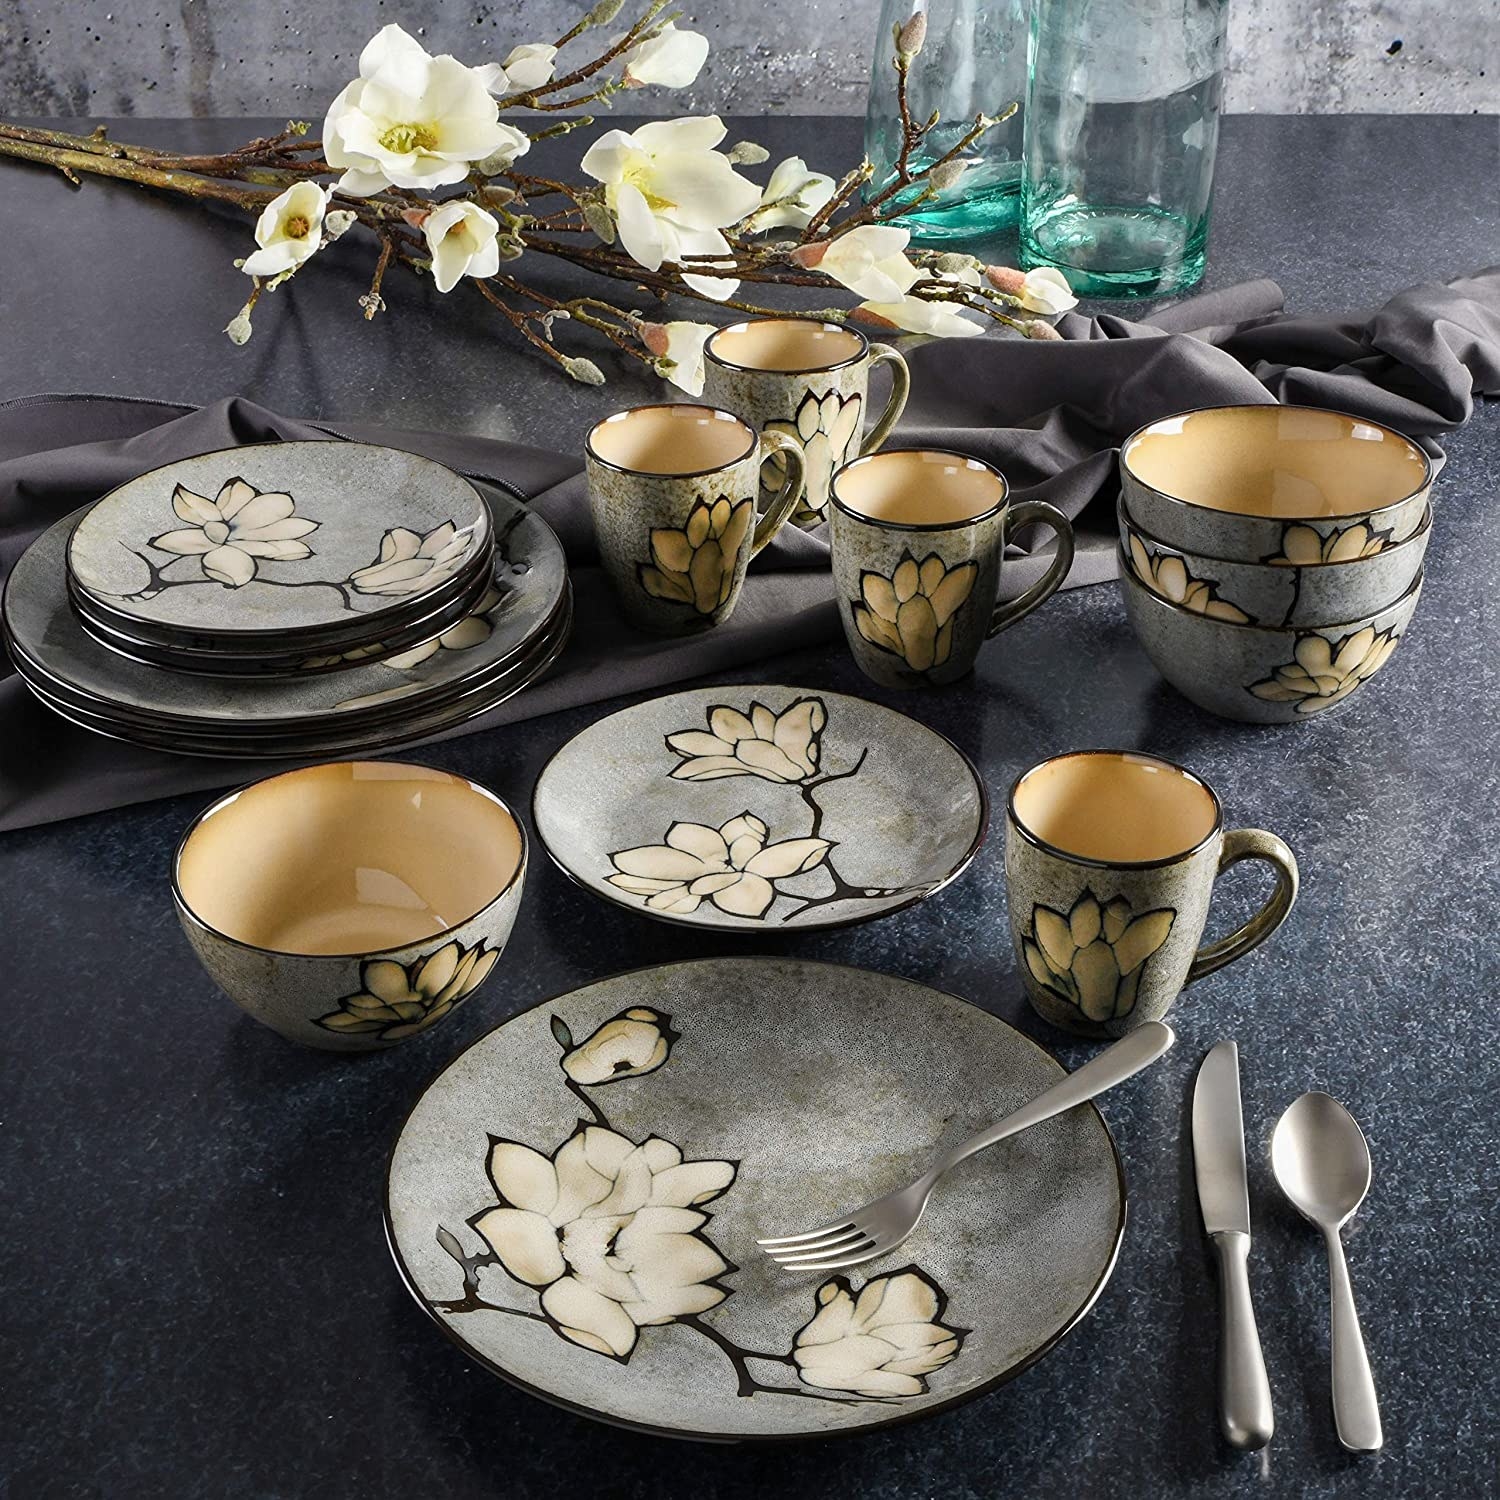 several gray gibson elite plates, bowls and mugs laid out on a table